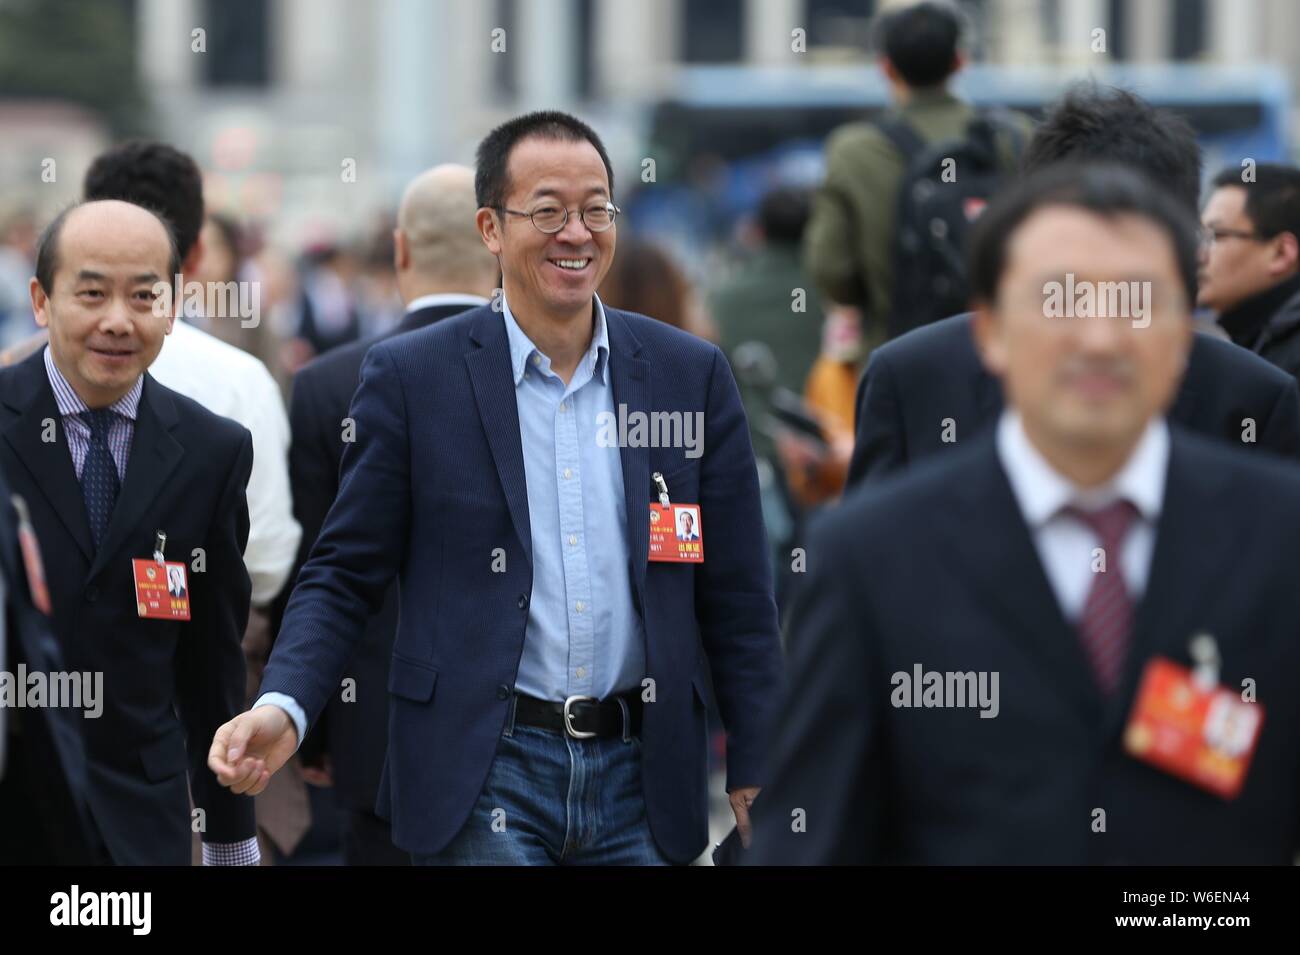 Michael Yu Minhong, founder and CEO of New Oriental Education & Technology Group, arrives at the Great Hall of the People to attend the closing meetin Stock Photo